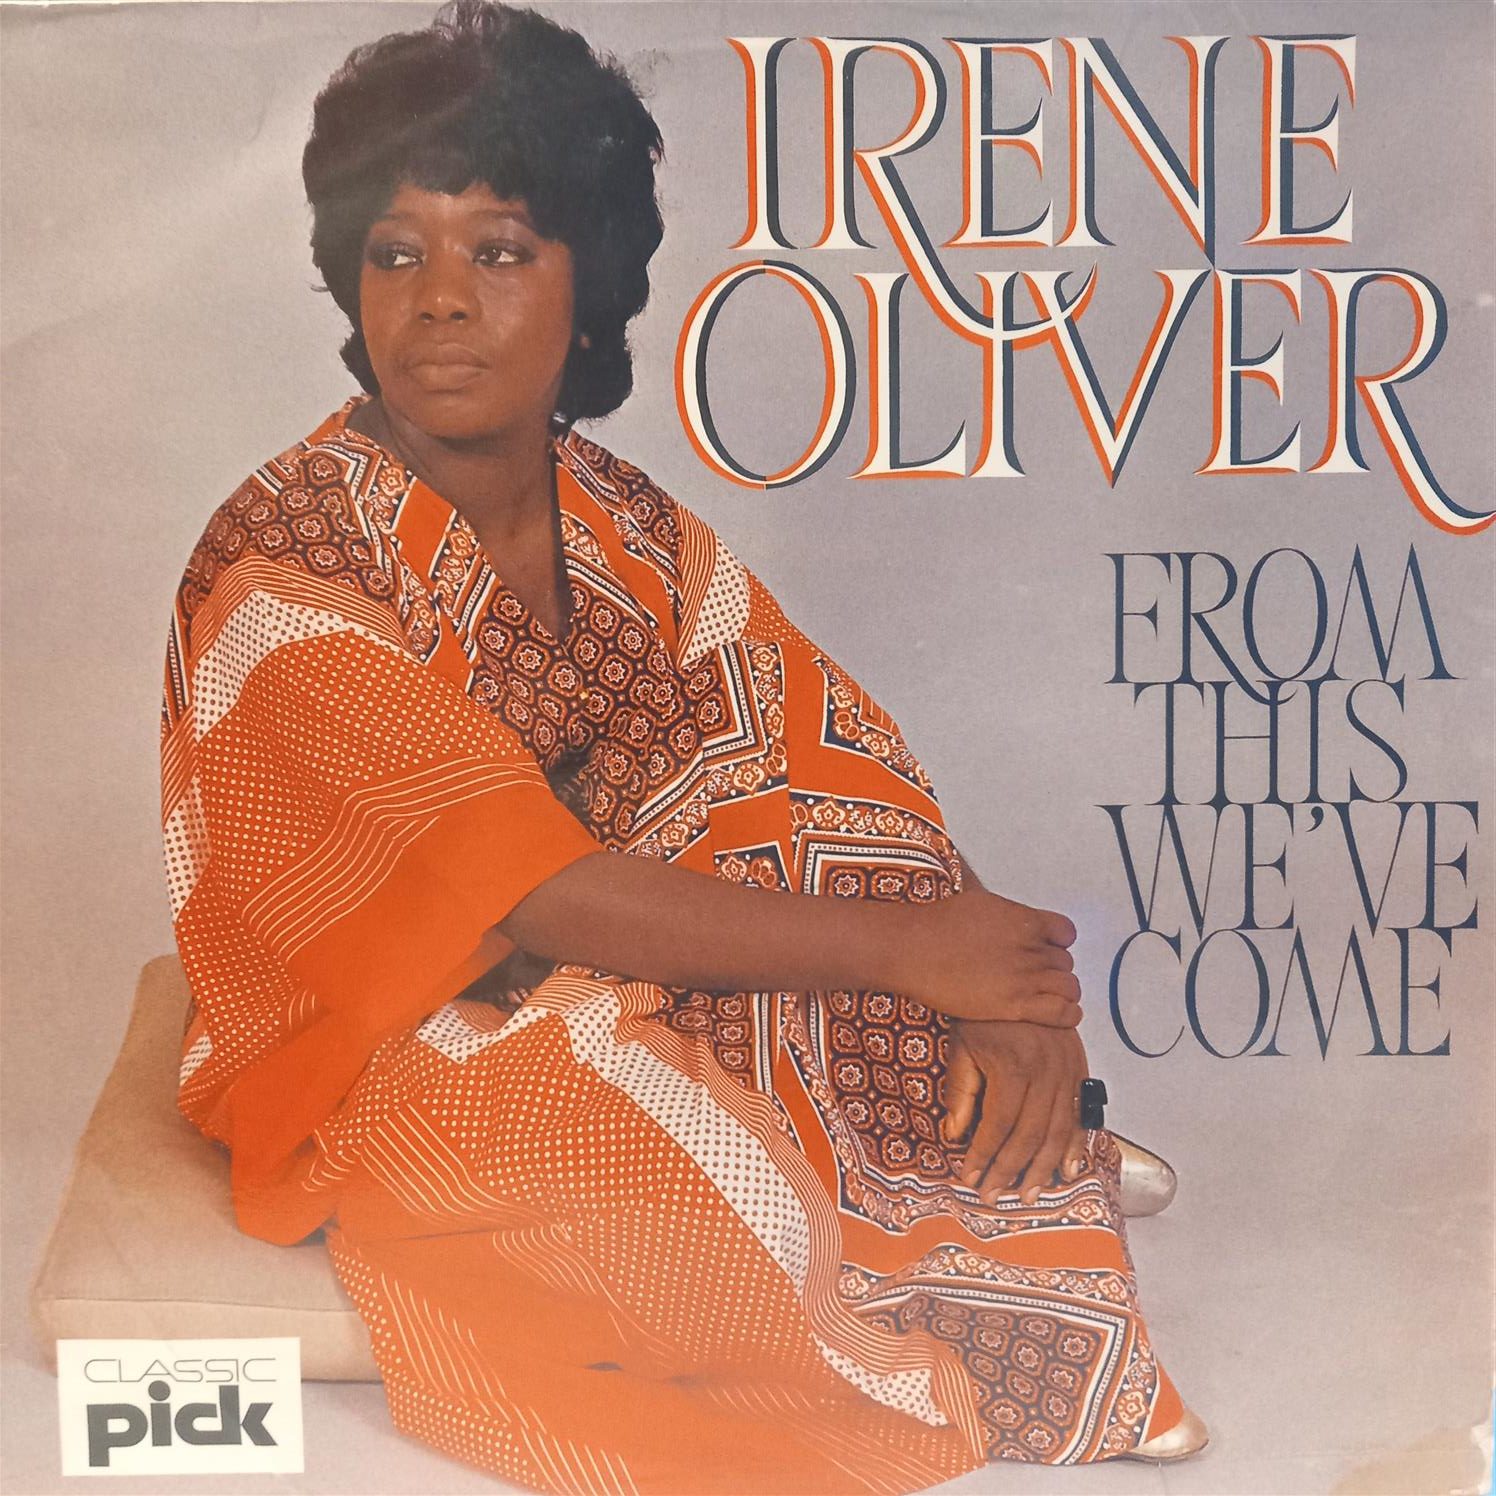 IRENE OLIVER – FROM THIS WE’VE COME ON